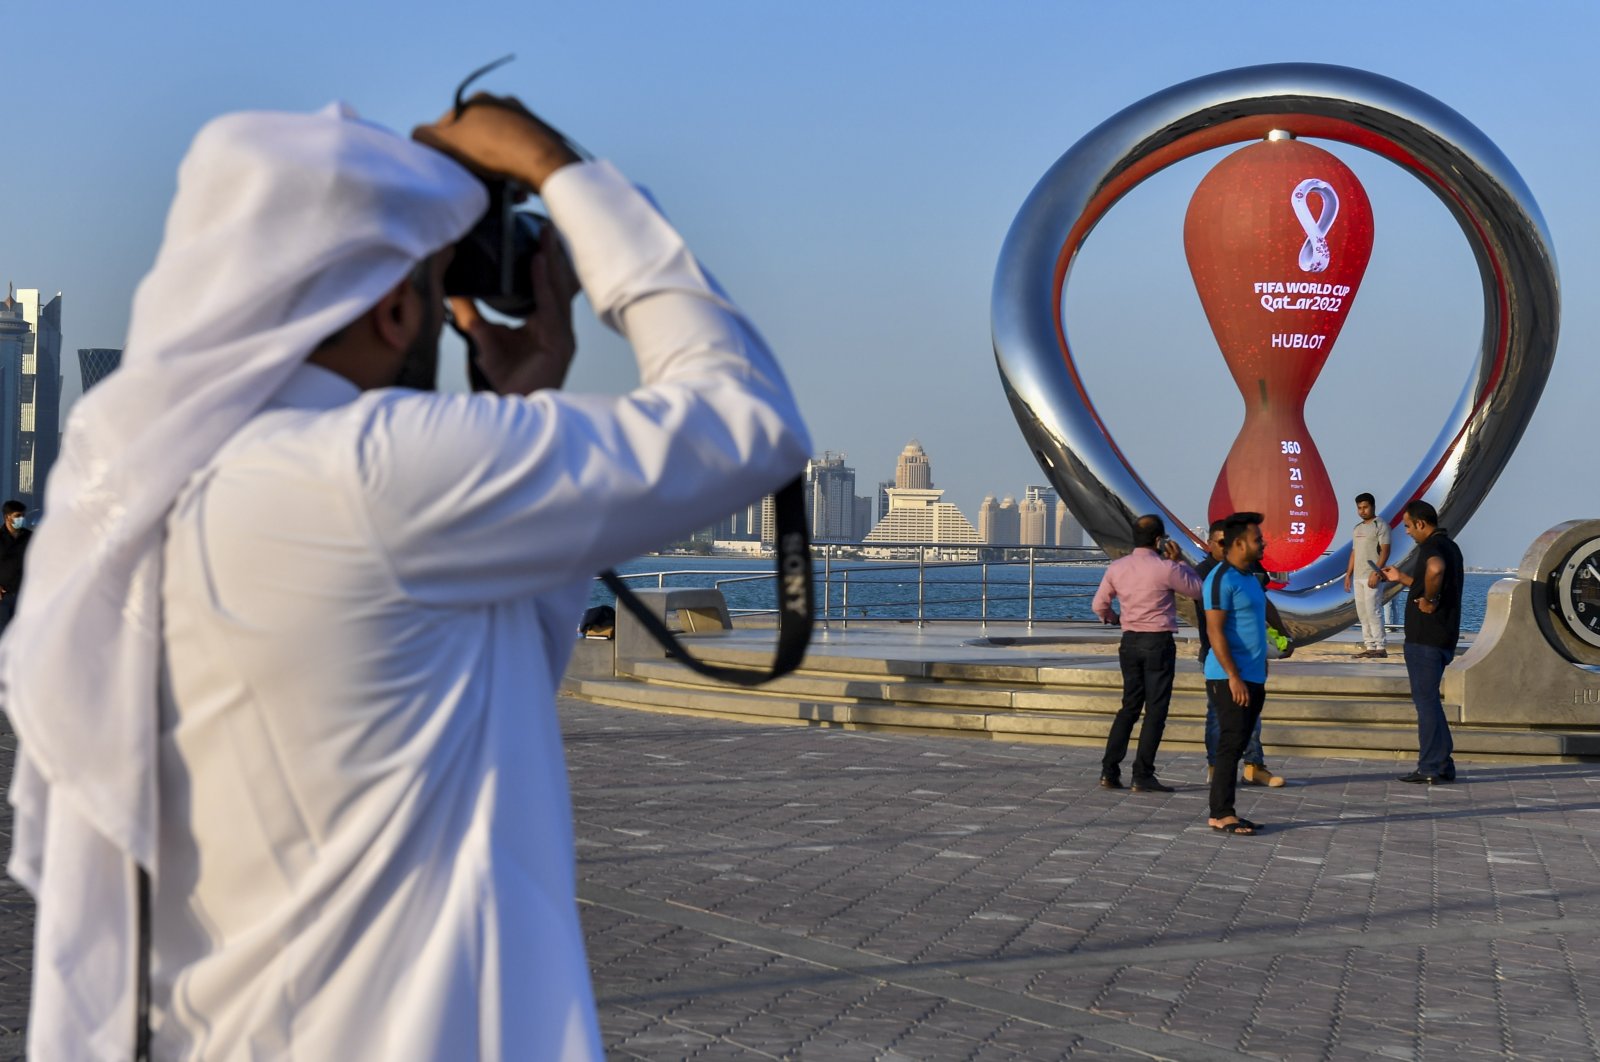 A Qatari man takes photographs of the clock counting down to the first match of the FIFA World Cup 2022 at Doha Corniche in Doha, Qatar, 25 November 2021. (EPA Photo)